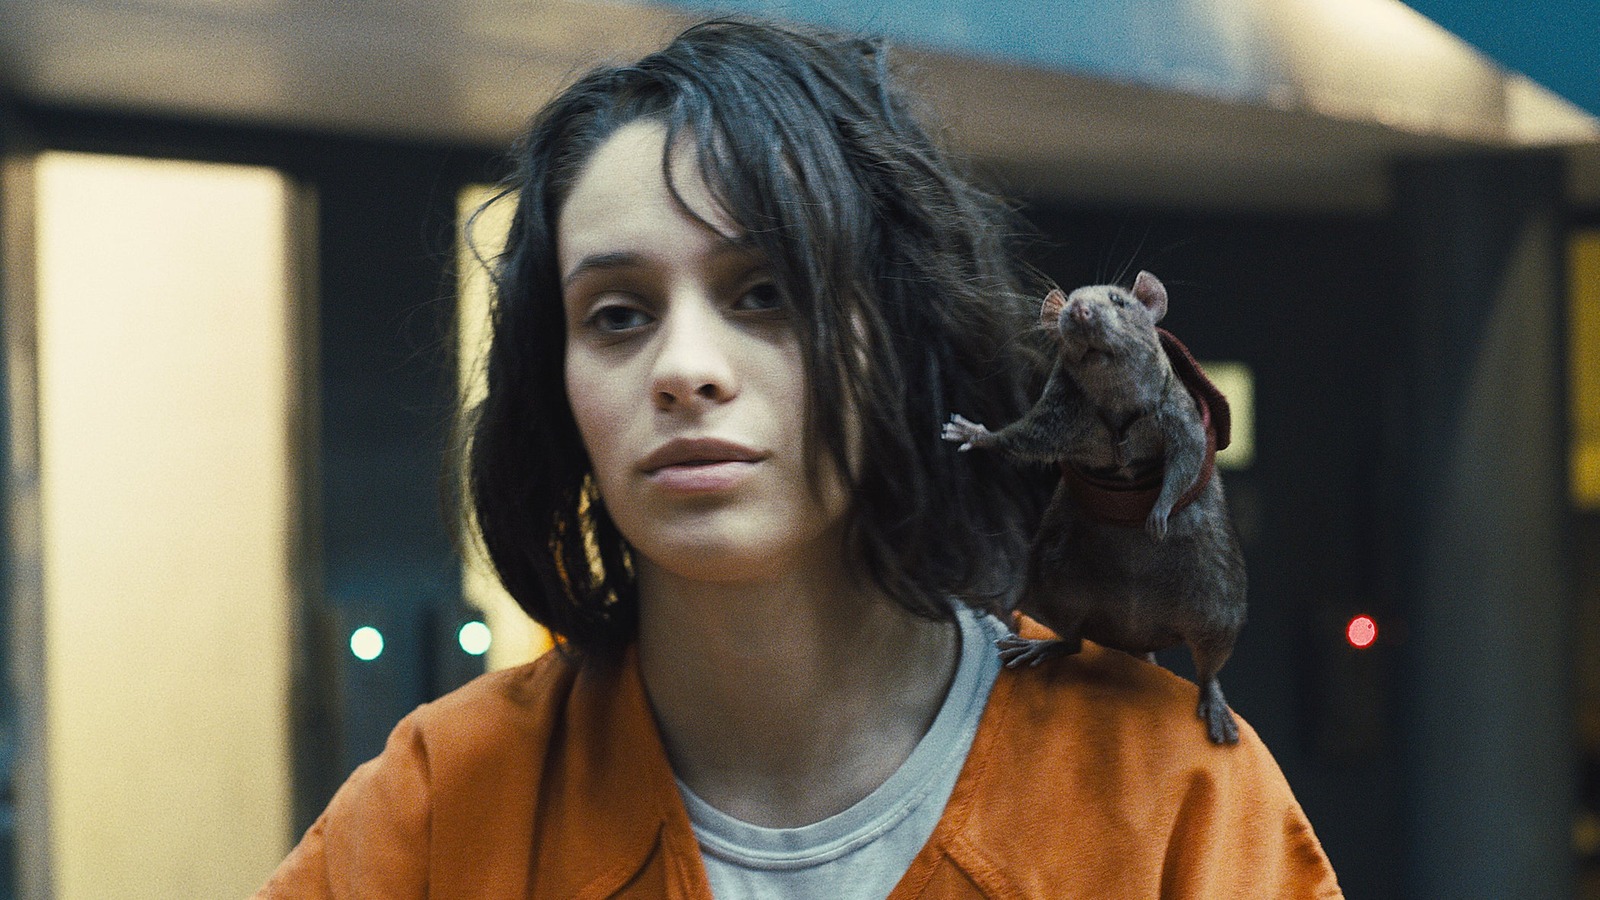 #The Suicide Squad Star Daniela Melchior (AKA Ratcatcher 2) In Talks To Join Fast & Furious 10